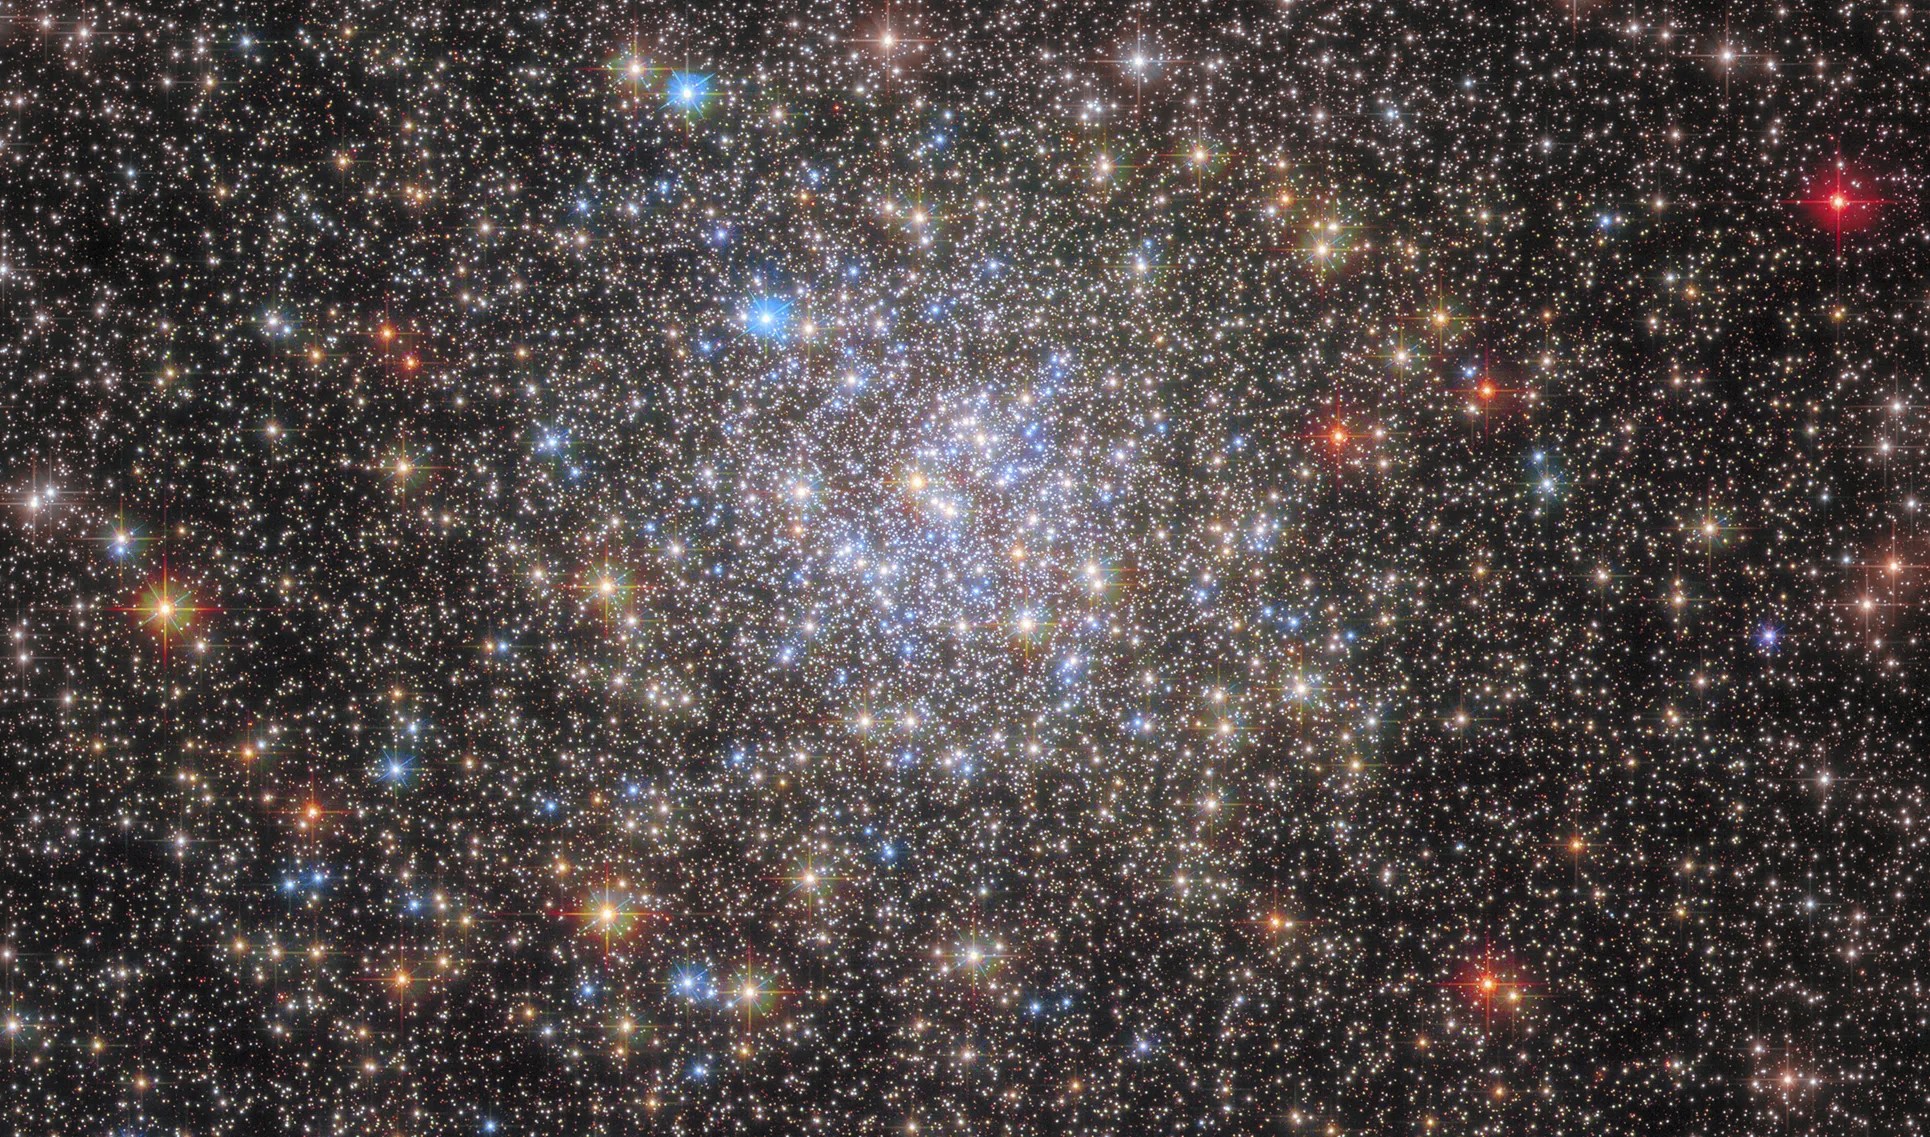 Stars fill the view. a dense, spherical collection of blue and yellow-white stars toward the center. the image’s edges hold redder foreground stars, and many small background stars.